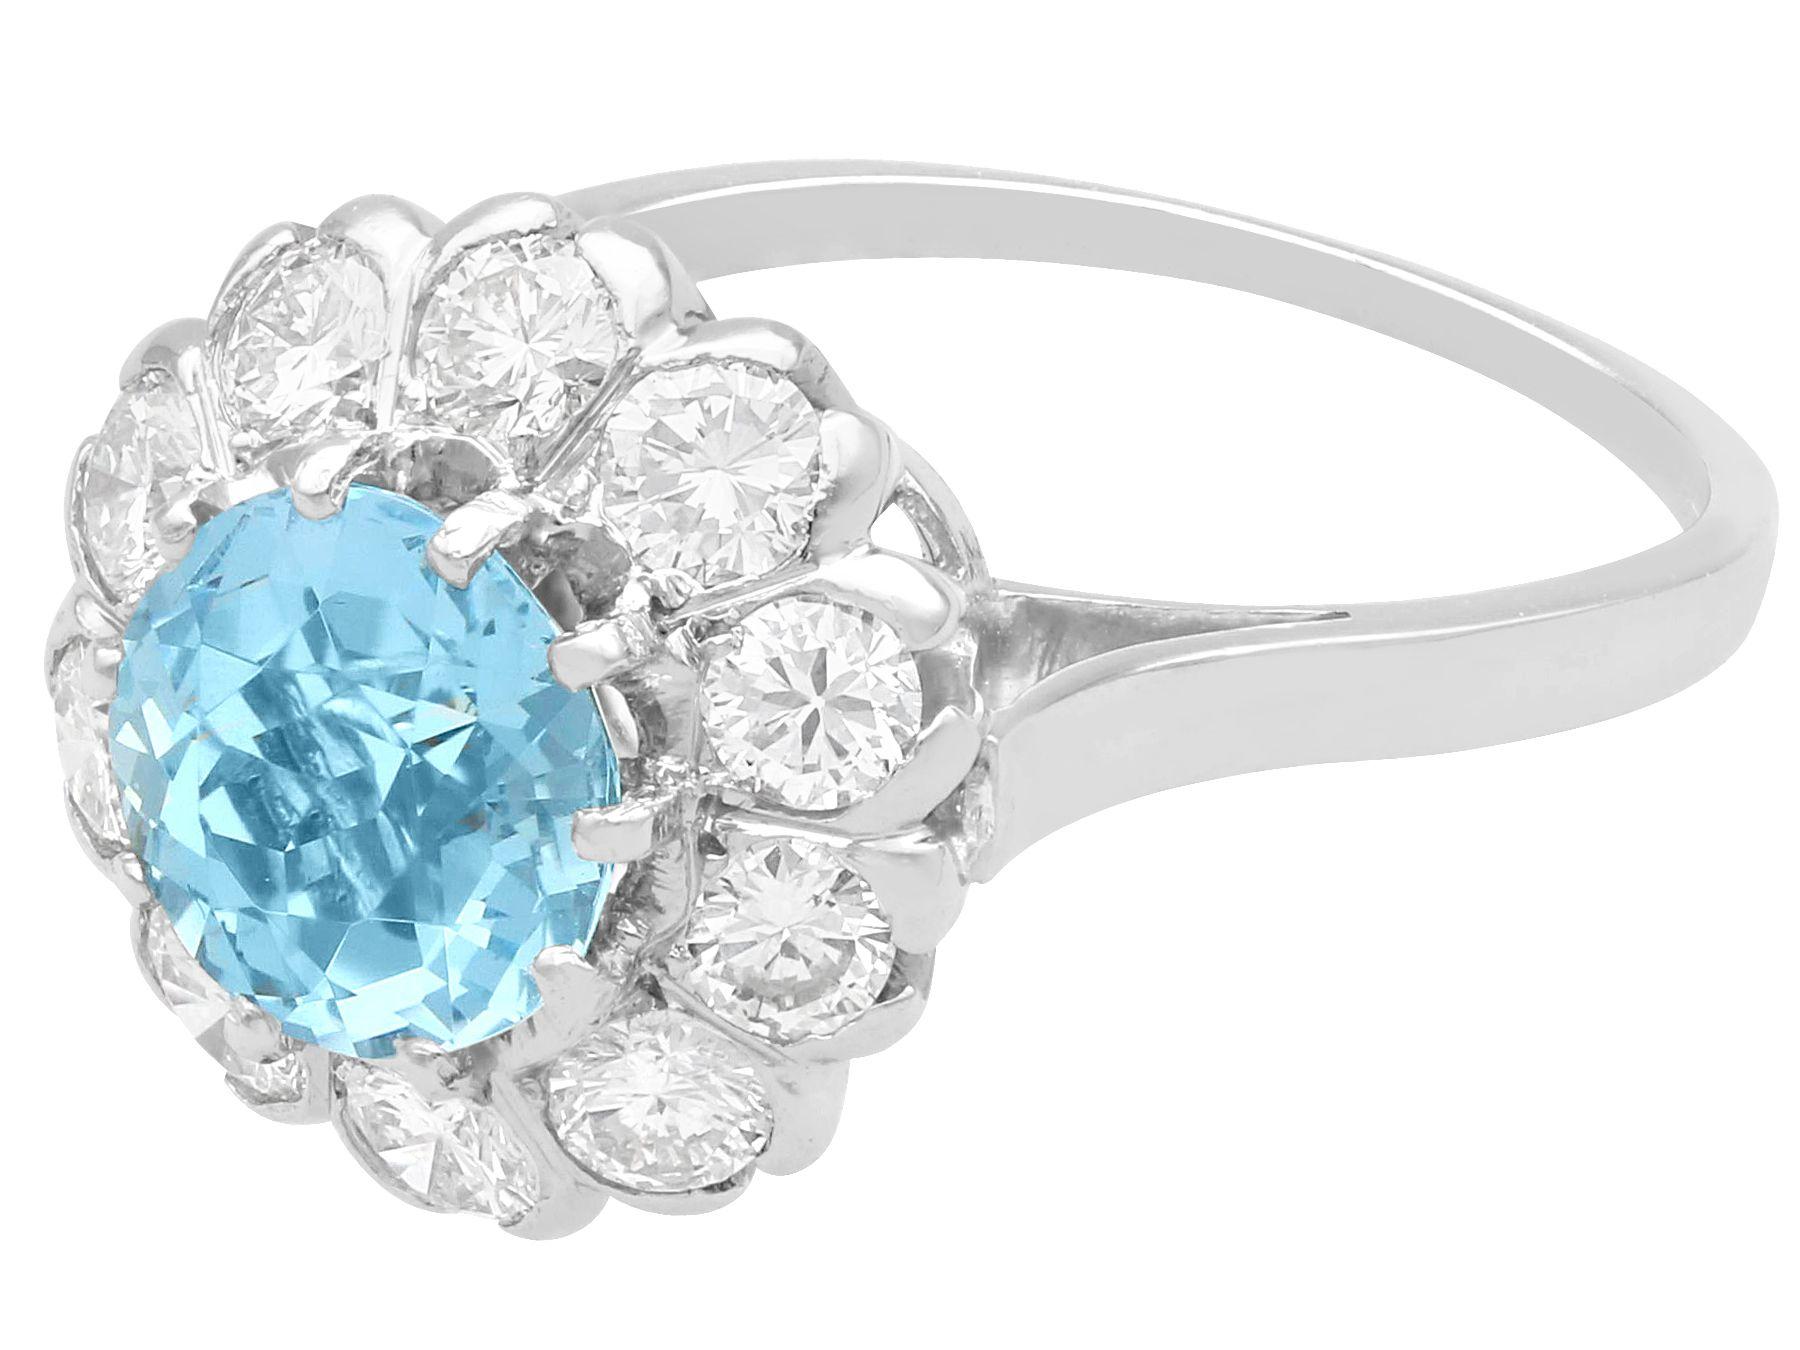 A stunning, fine and impressive 1.50 carat aquamarine and 0.95 carat diamond platinum cluster ring; part of our diverse vintage jewellery collections.

This stunning, fine and impressive aquamarine and diamond ring has been crafted in platinum.

The